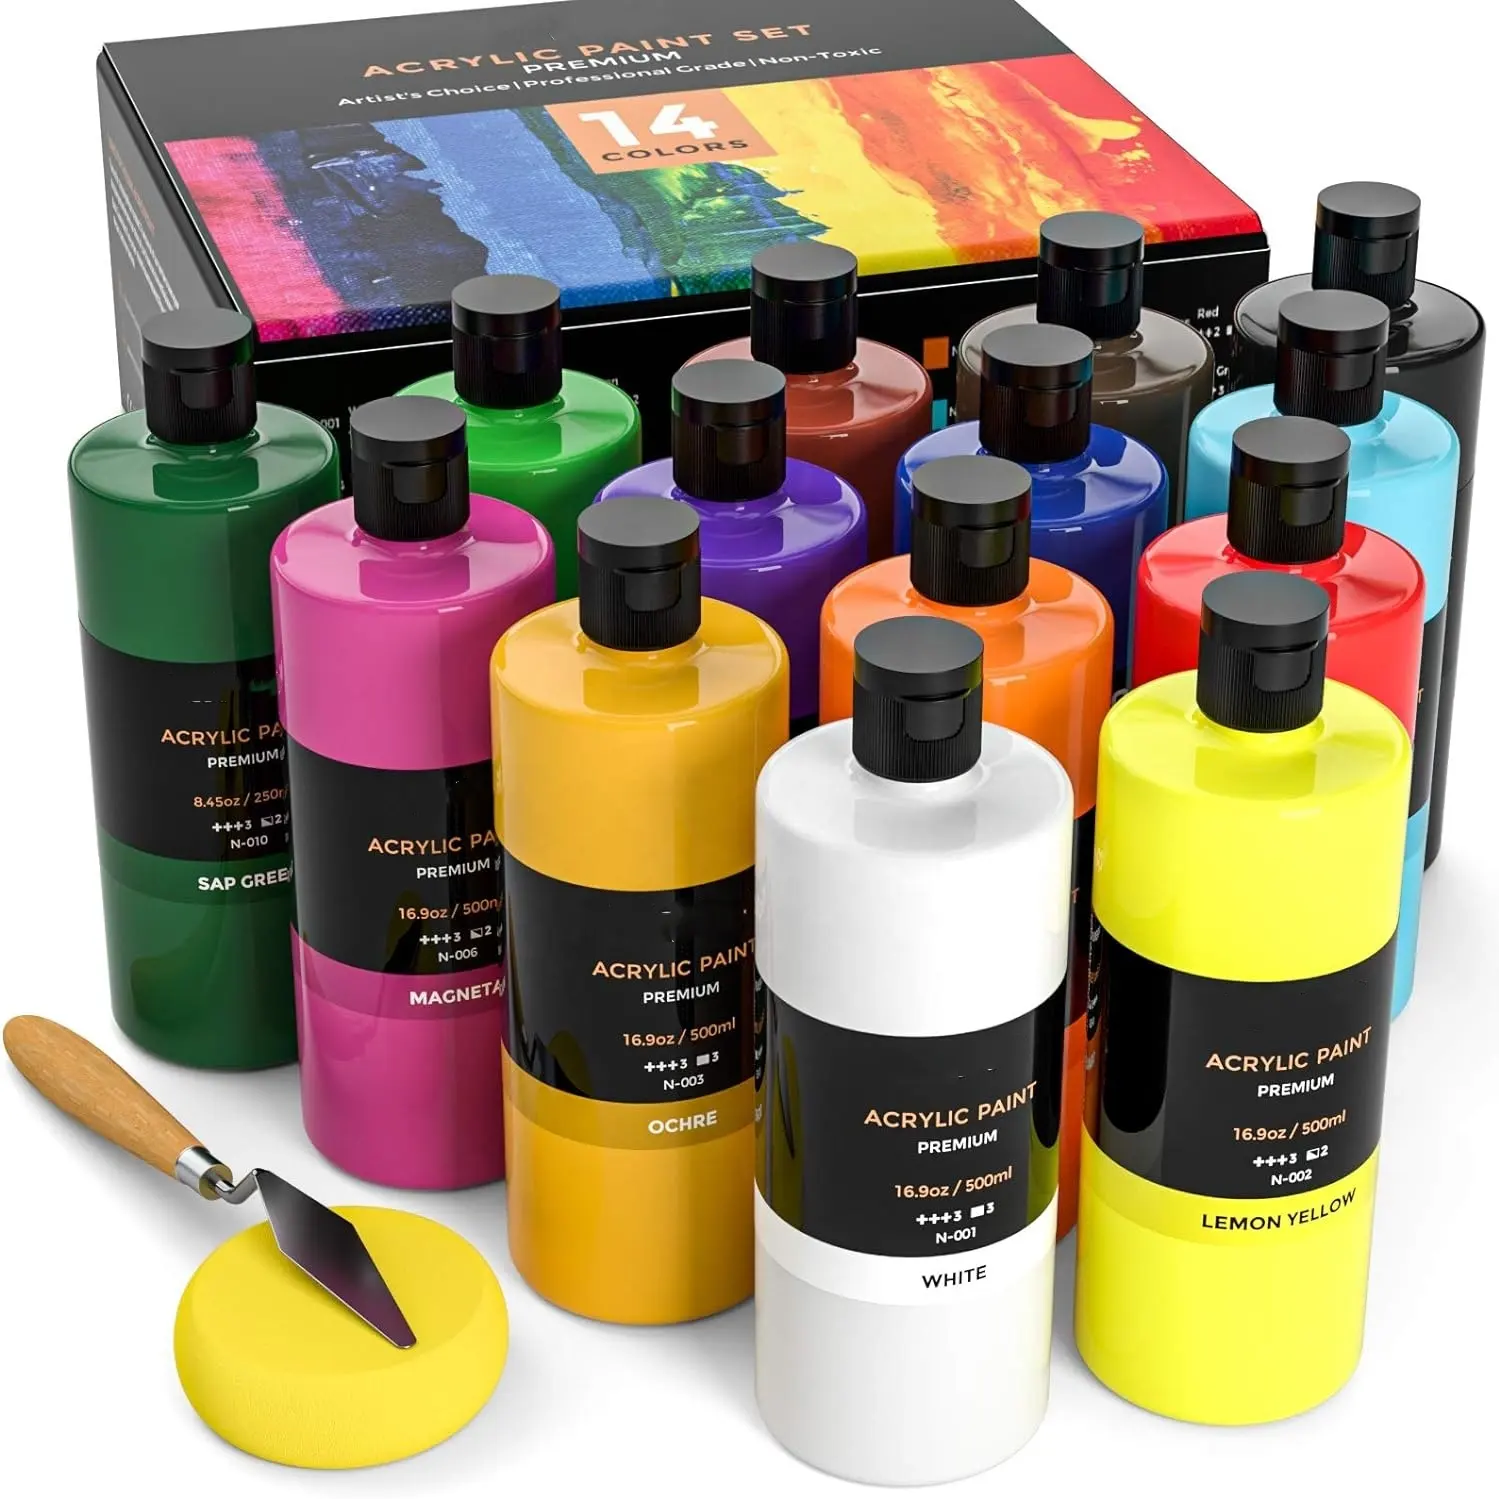 Art Painting Supplies for Canvas Wood Ceramic Crafts Rich Pigments for Hobby Painters16.9 oz /500 ml Acrylic Paint Set